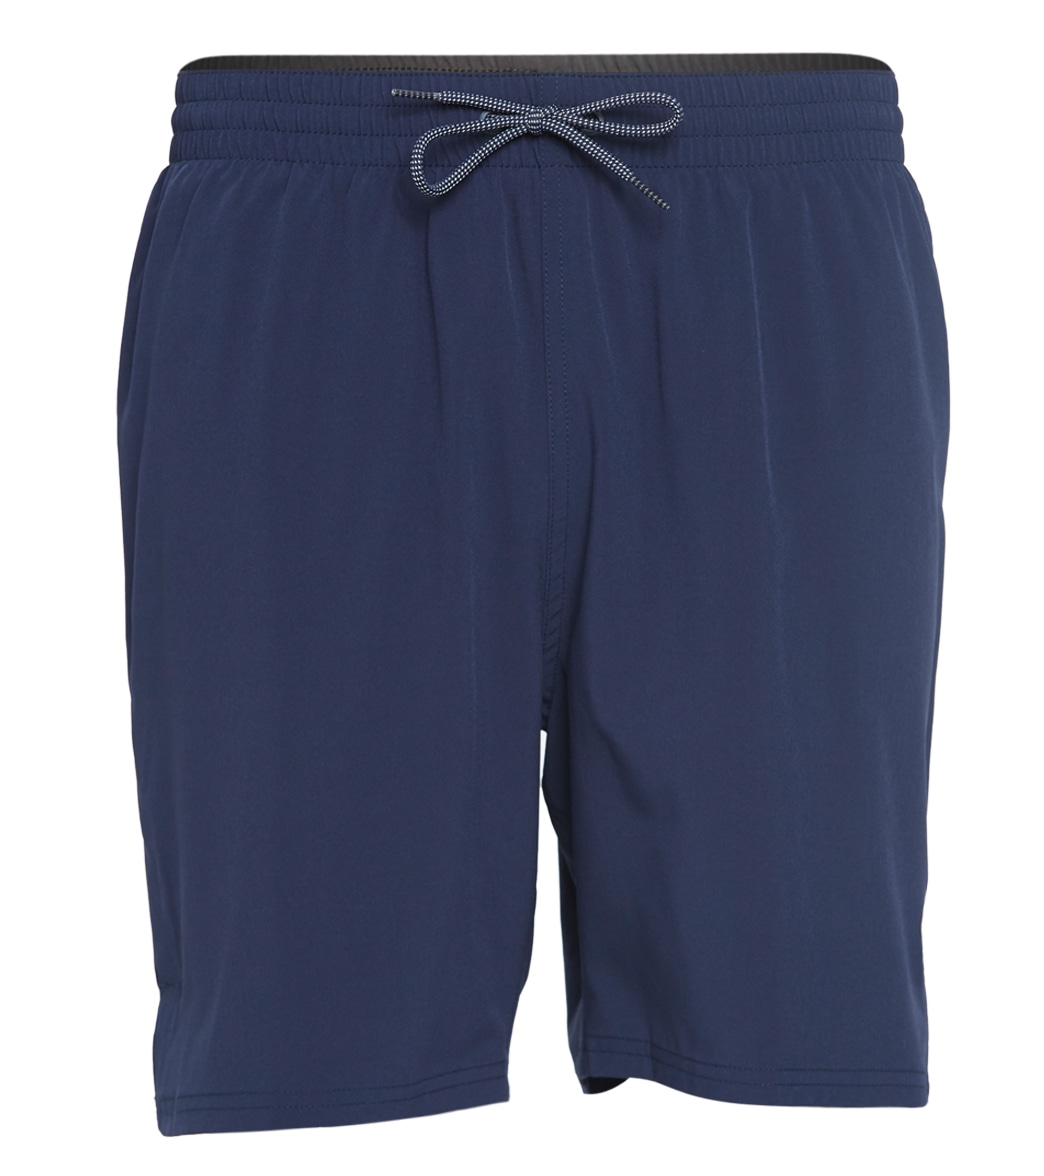 Nike Men's 18 Essential Vital Volley Short - Midnight Navy Large Polyester - Swimoutlet.com